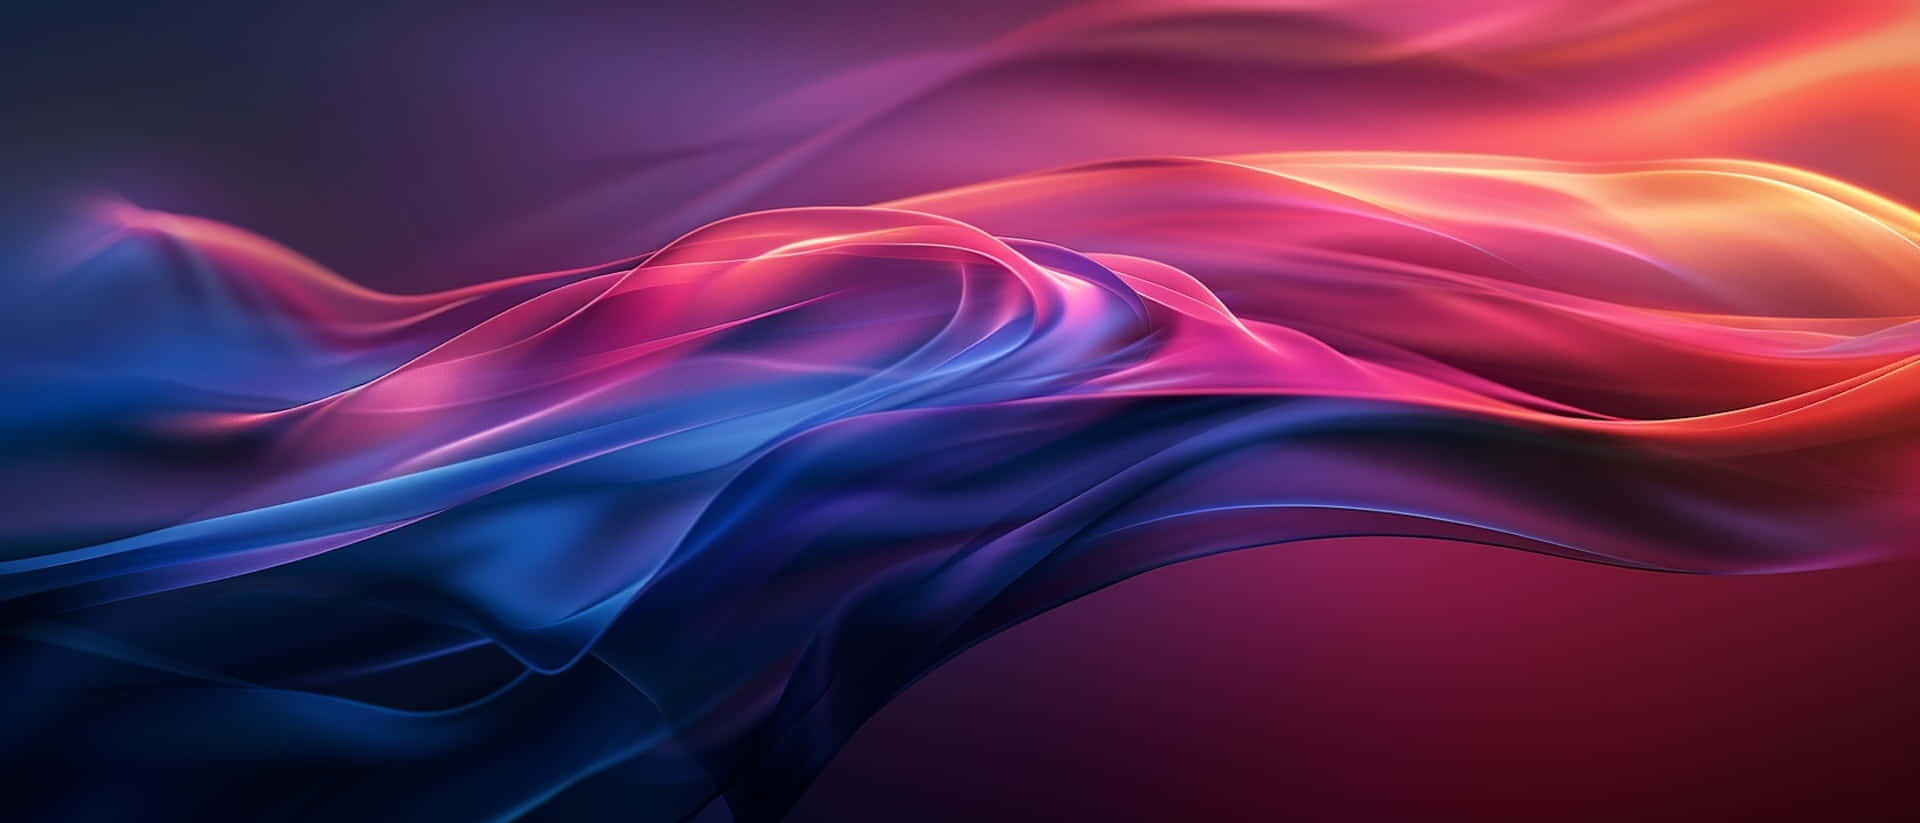 Abstract Silk Waves Background Wallpaper